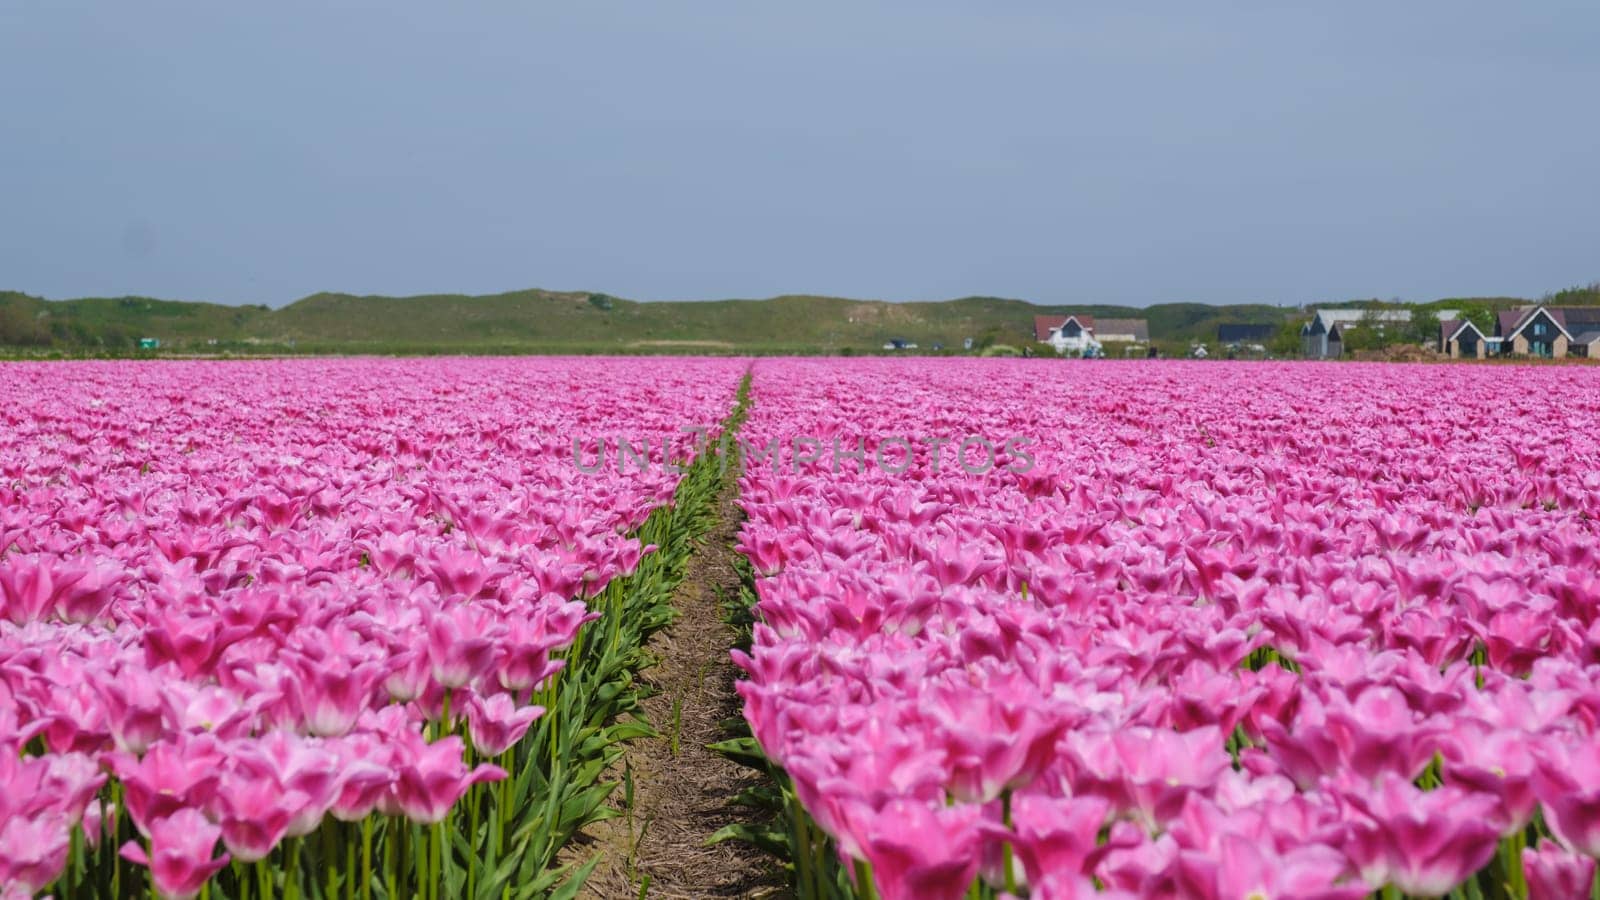 A breathtaking landscape of vibrant pink tulips stretching endlessly across a field in Texel, Netherlands, creating a mesmerizing sight of nature in full bloom.